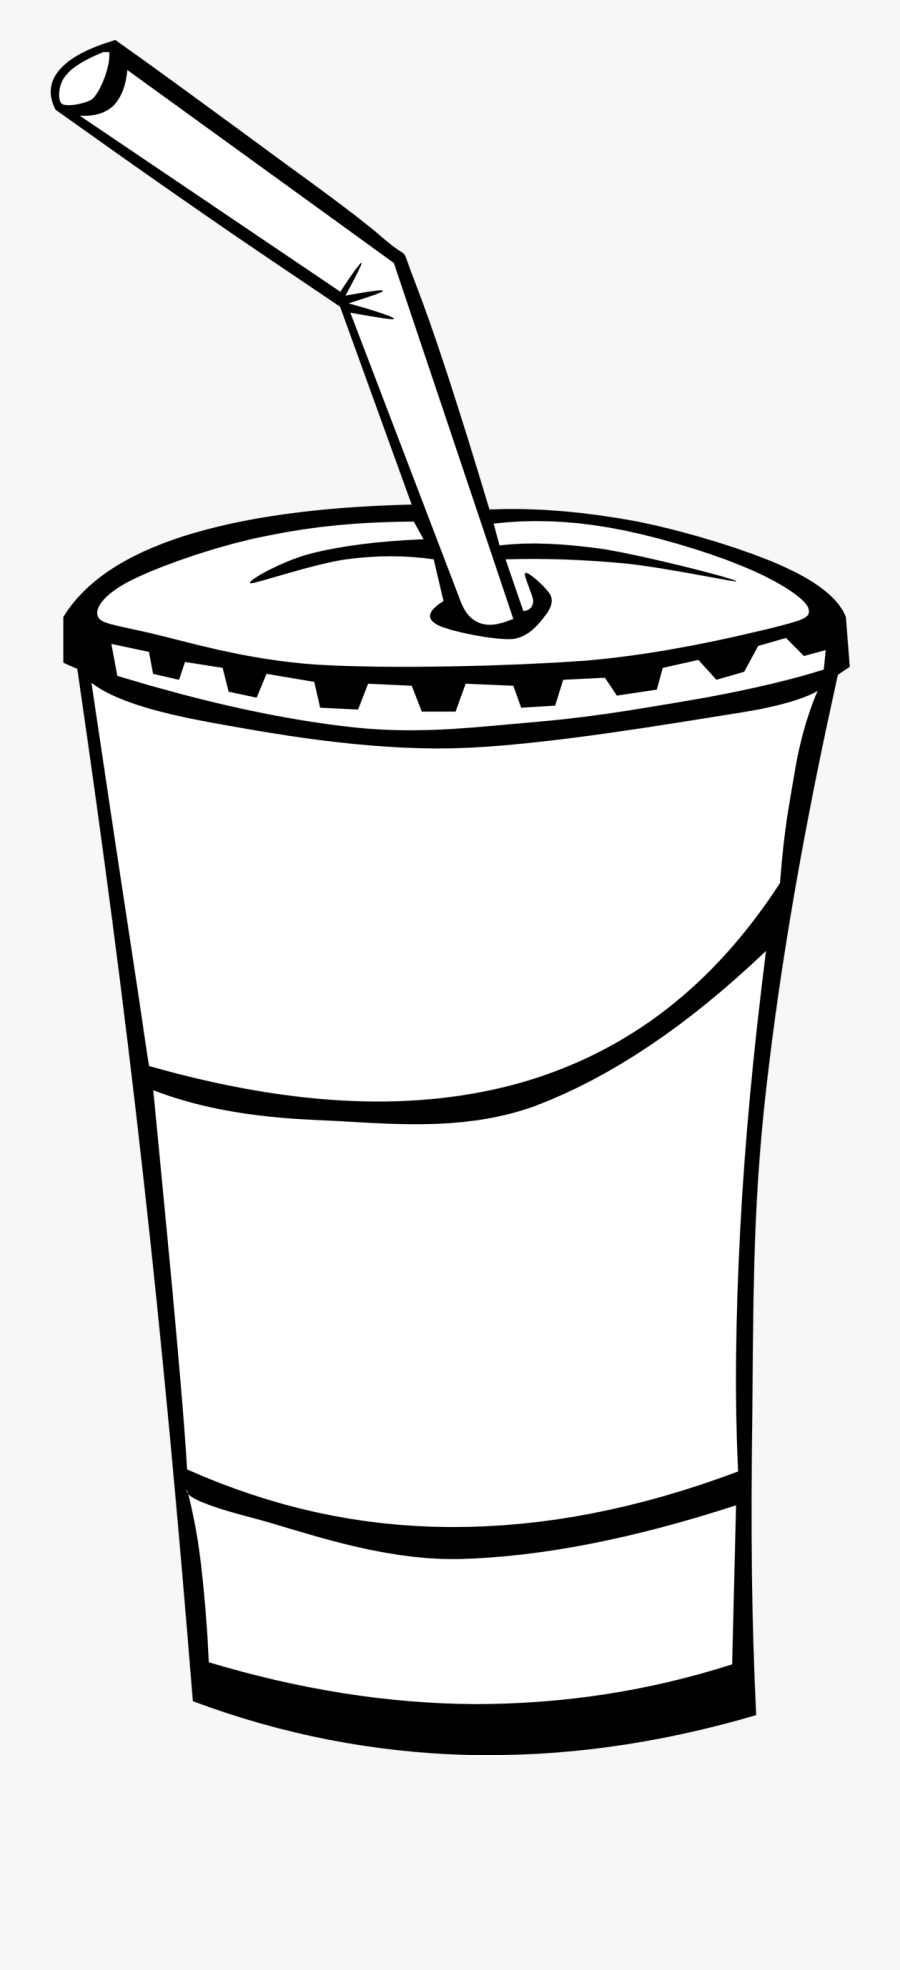 Food Cocktails Black And White Clipart - Soda Clipart Black And White, Transparent Clipart